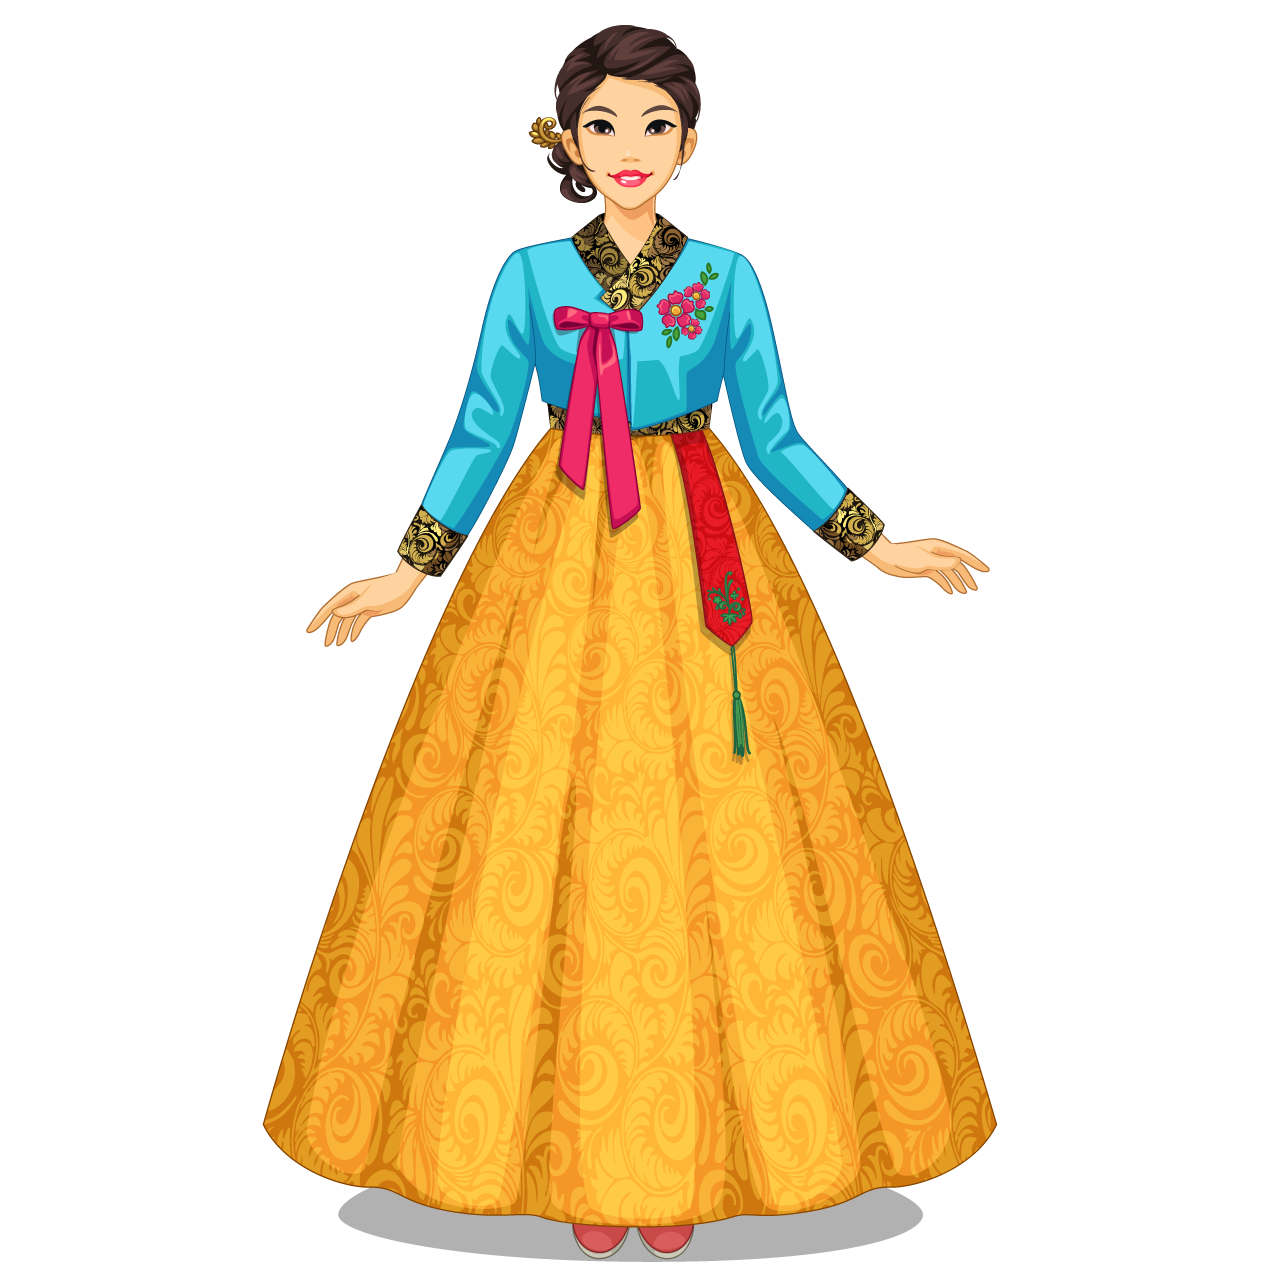 Female character south korean woman traditional outfit